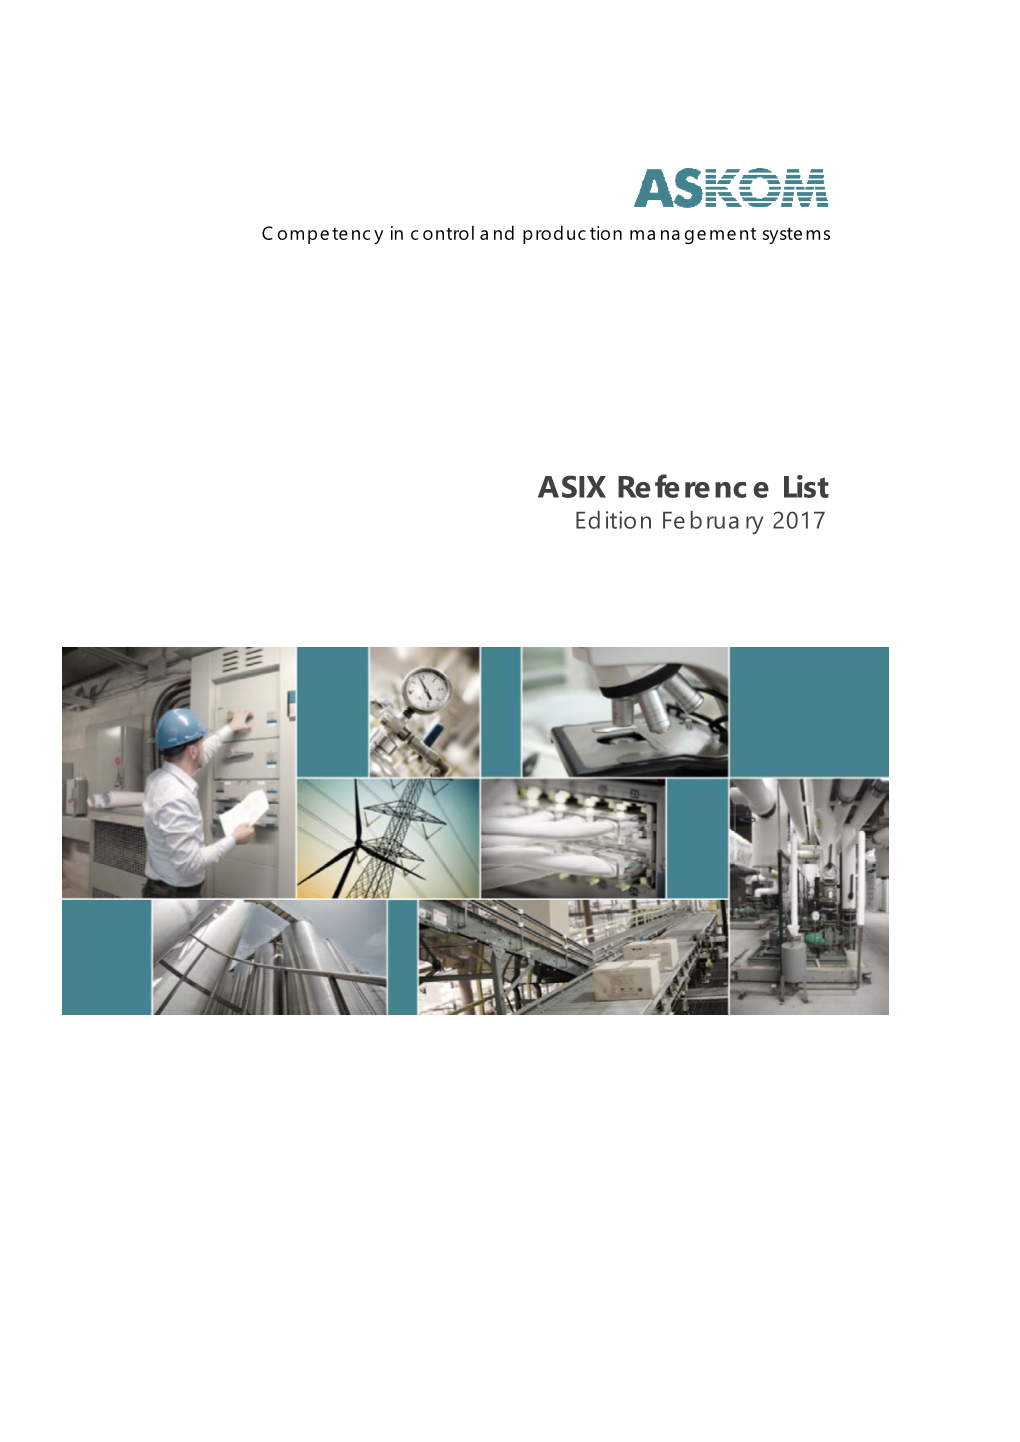 ASIX Reference List Edition February 2017